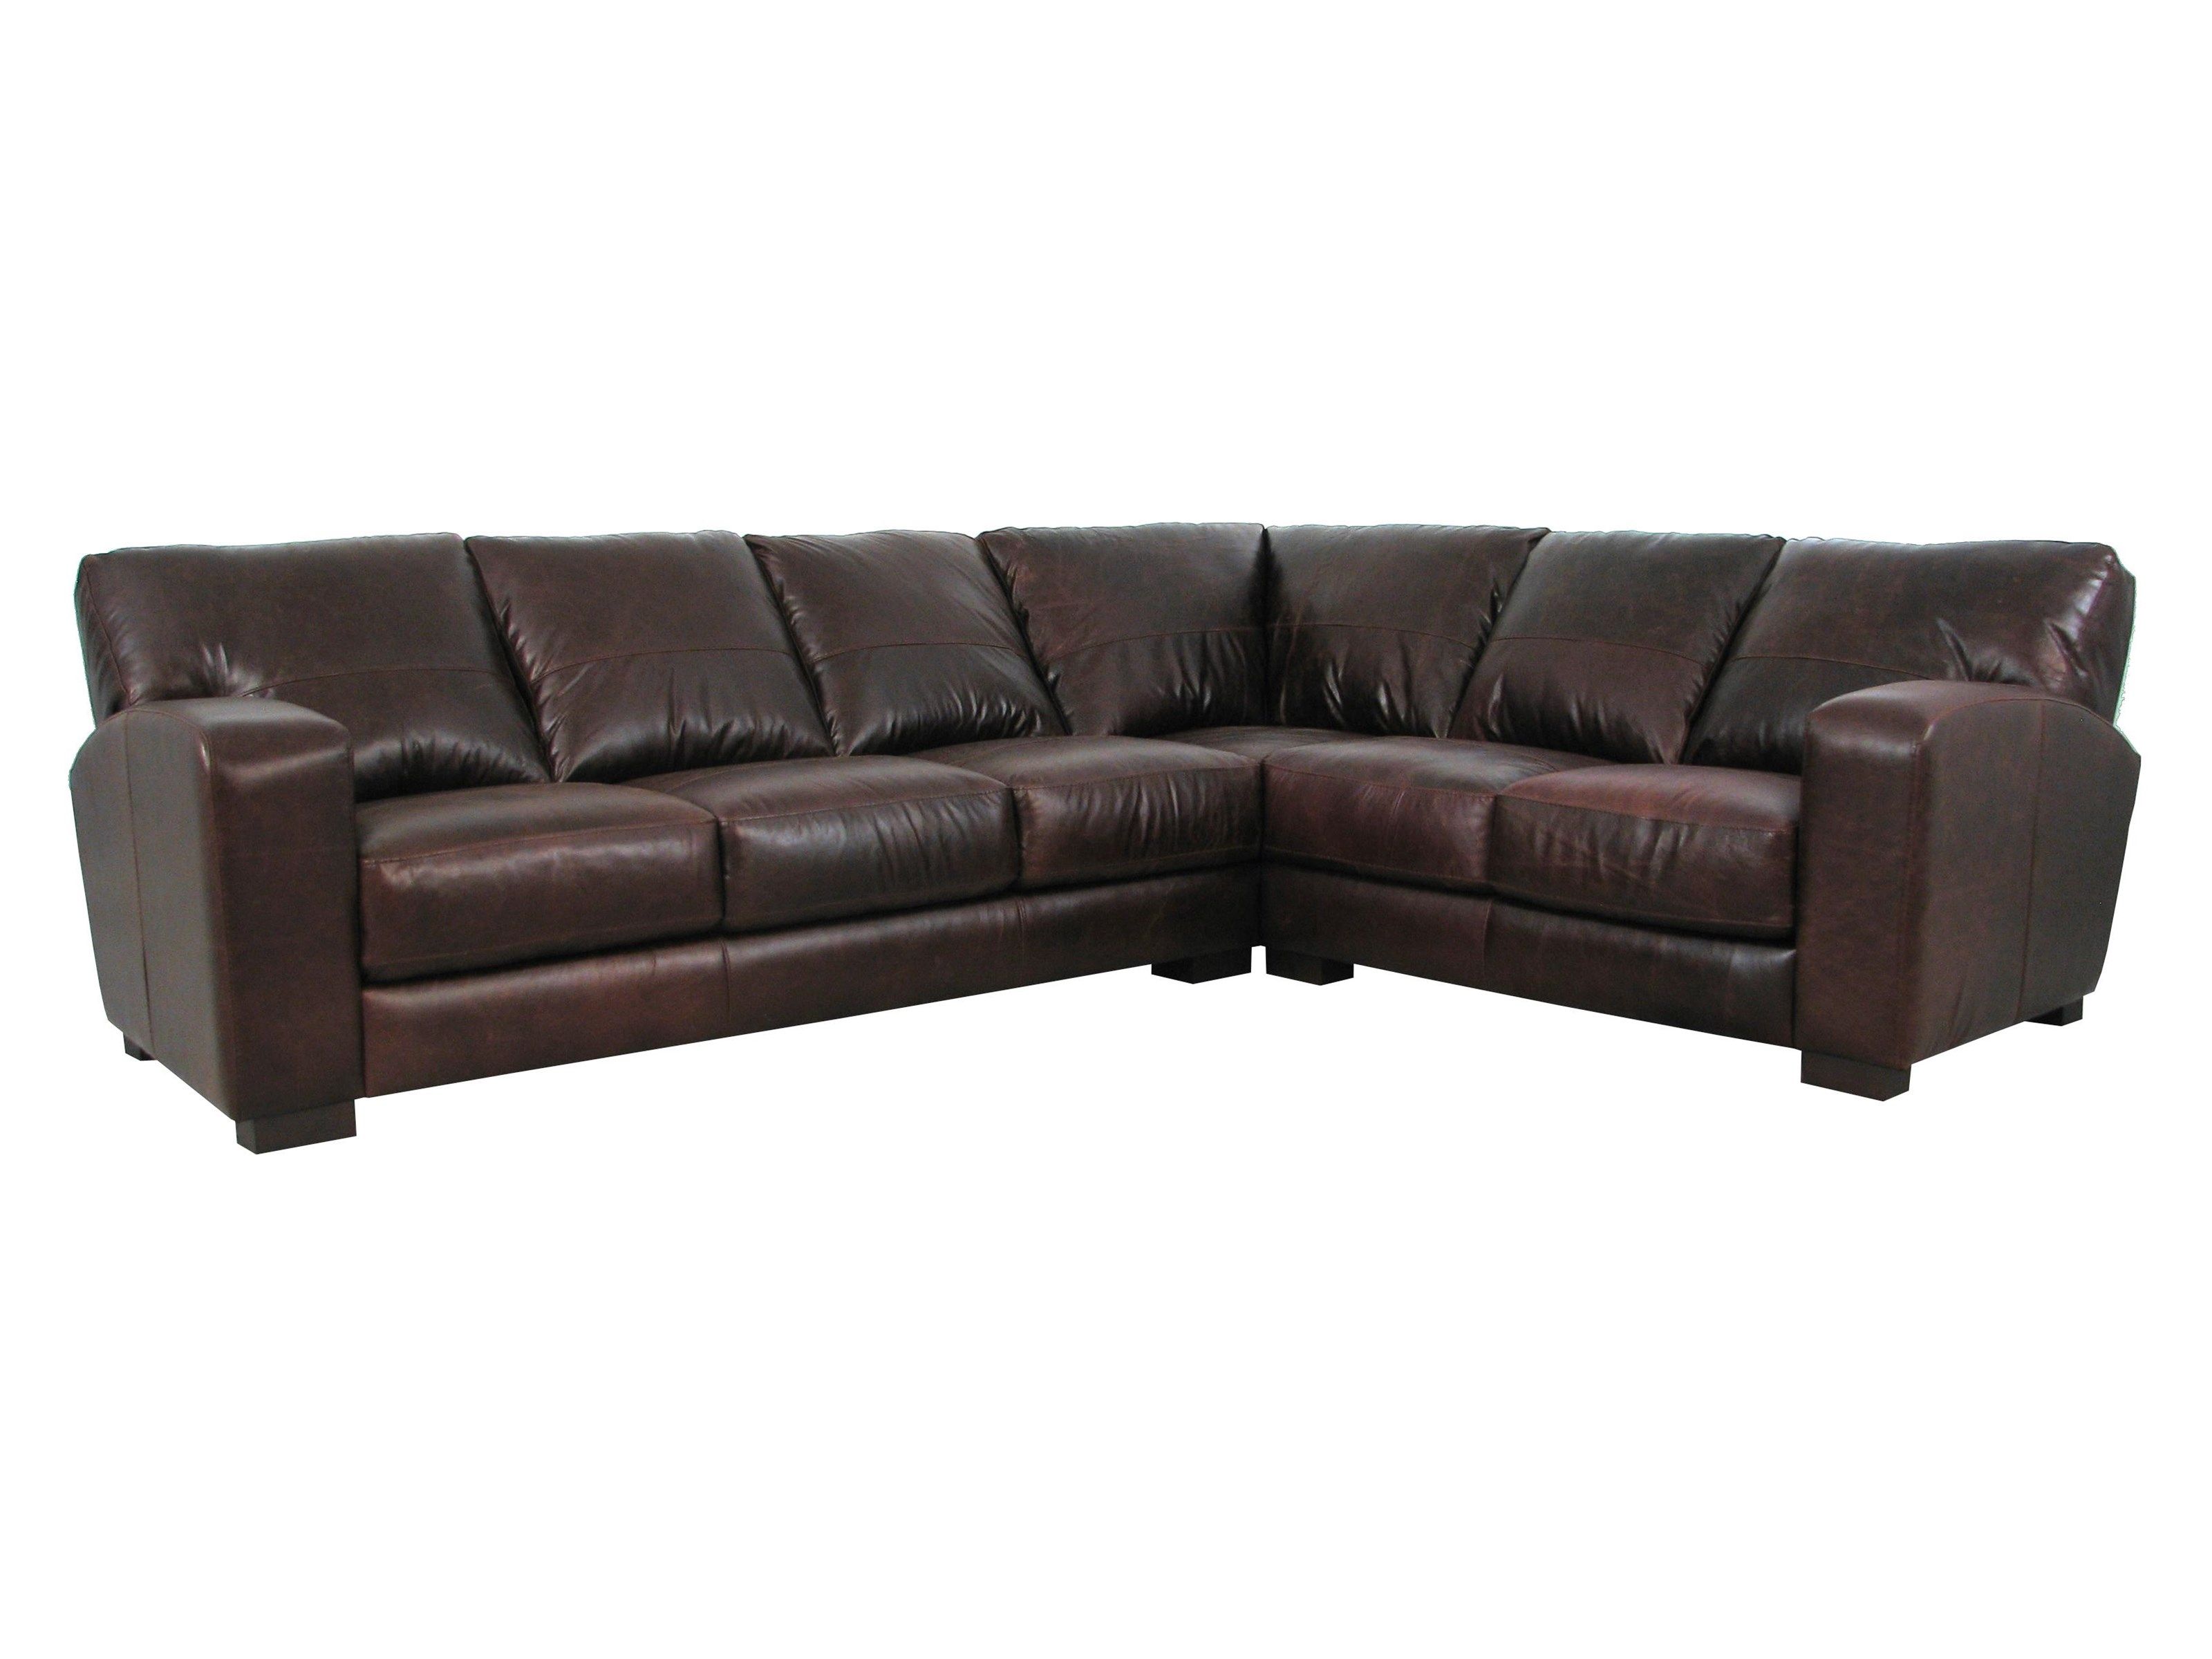 Beautiful Sectional Sofas Tampa 47 For Diana Dark Brown Leather Pertaining To Diana Dark Brown Leather Sectional Sofa Set (View 12 of 15)